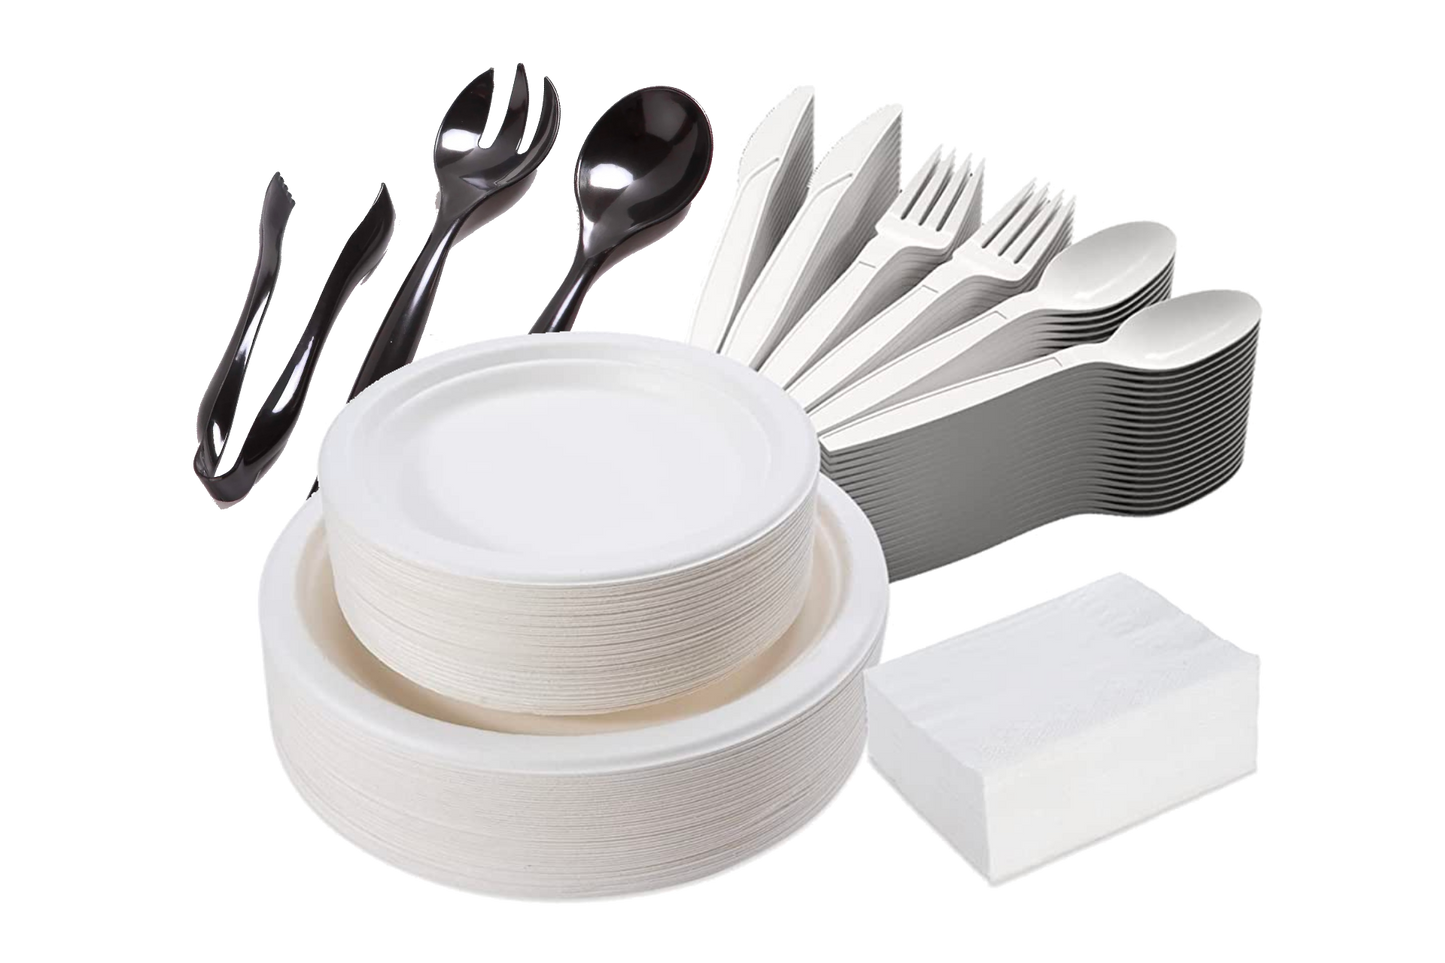 Servingware, Plates, Cutlery and Napkins